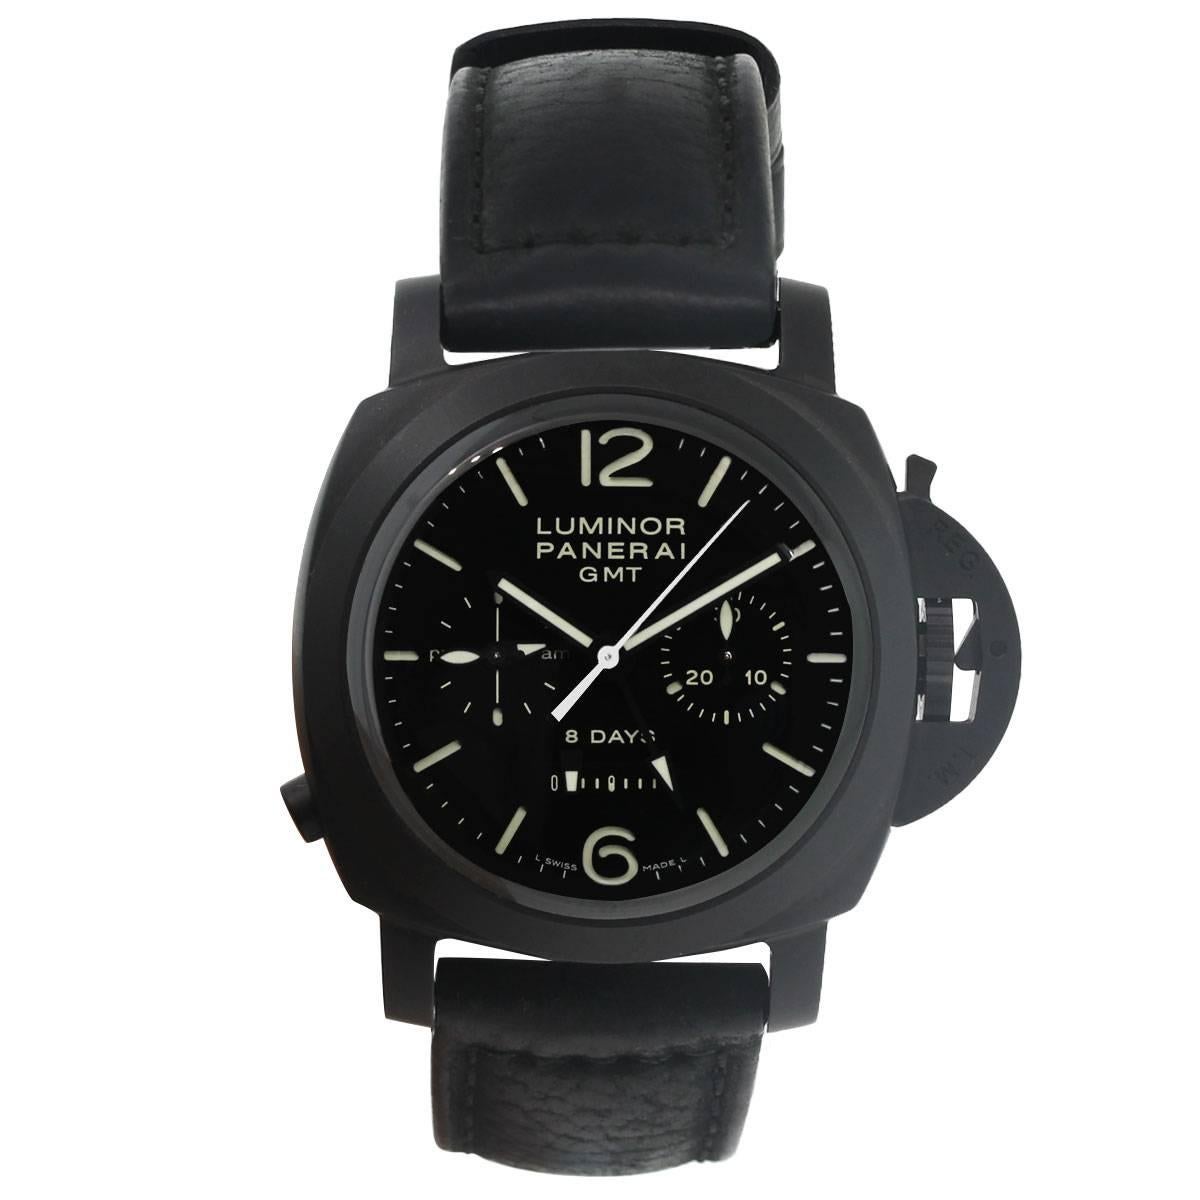 Brand: Panerai
MPN: 1950
Model: Luminor PAM00317
Case Material: Ceramic
Case Diameter: 44mm
Crystal: Scratch resistant sapphire crystal
Bezel: Fixed black ceramic bezel
Dial: Black dial with luminous hands and index hour markers
GMT, second time